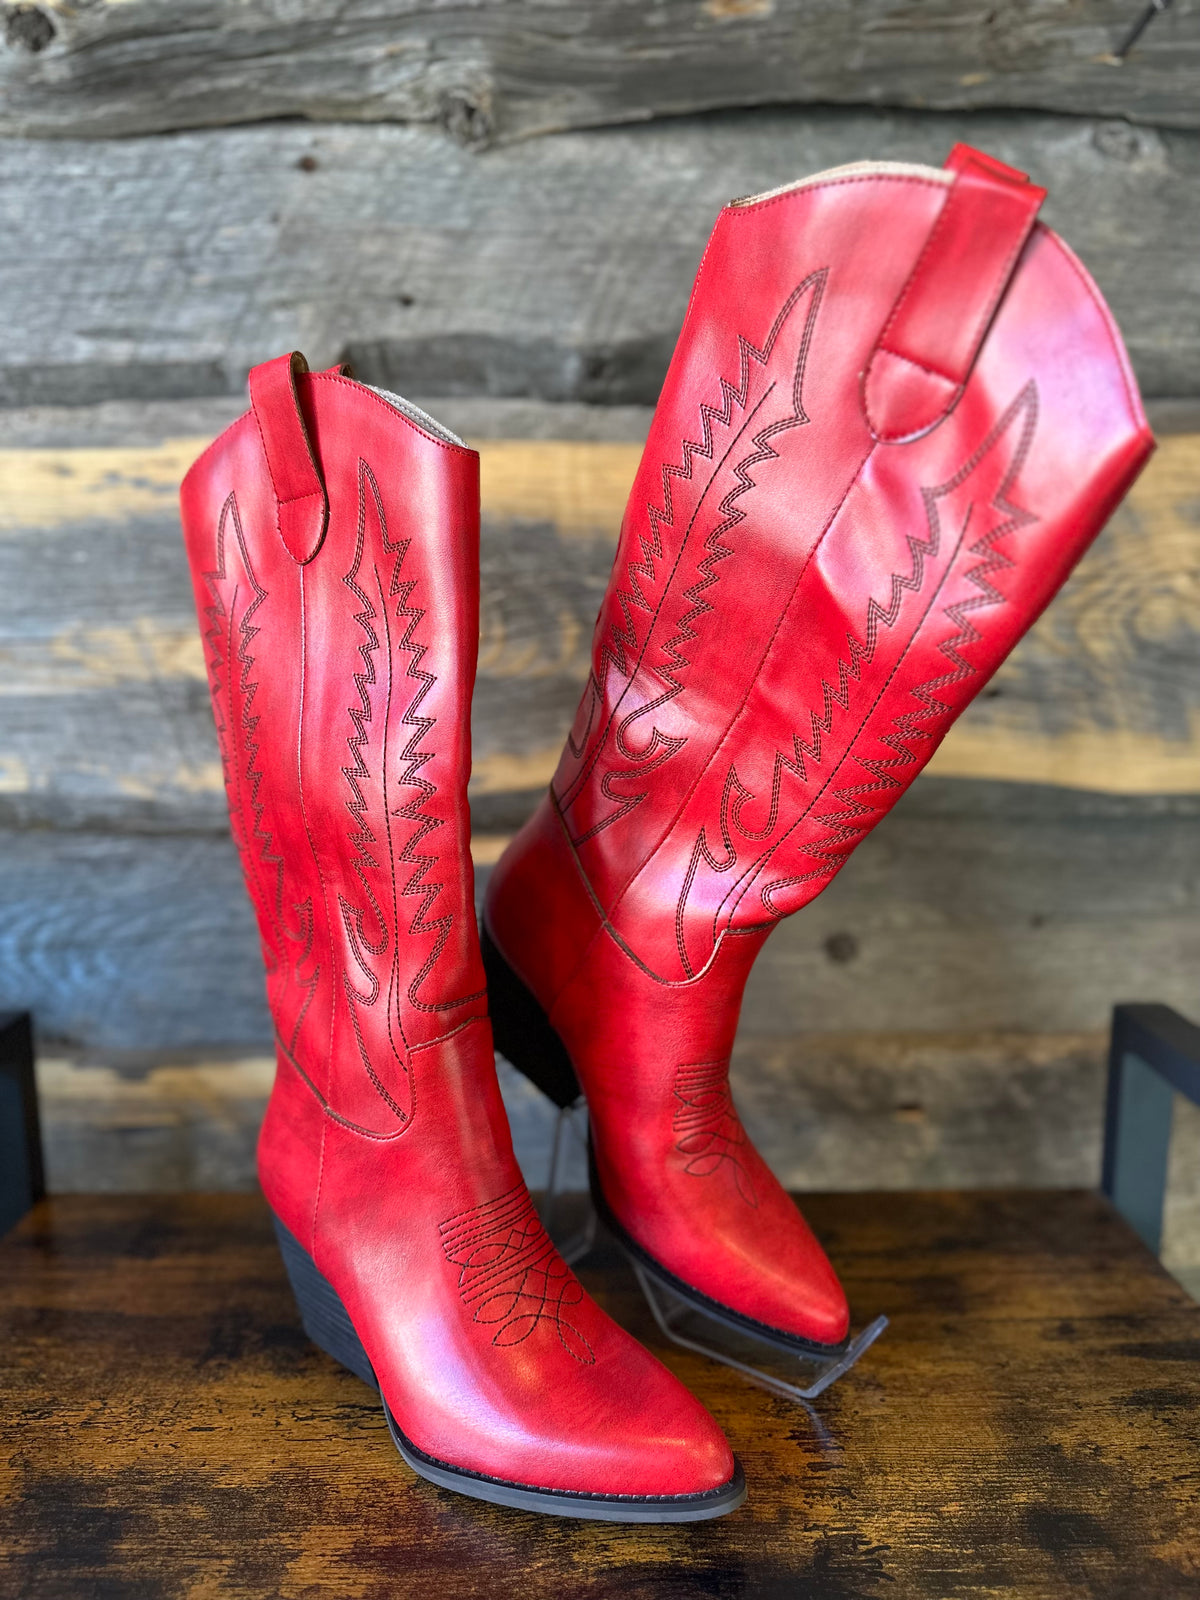 The Ruby Red Boot